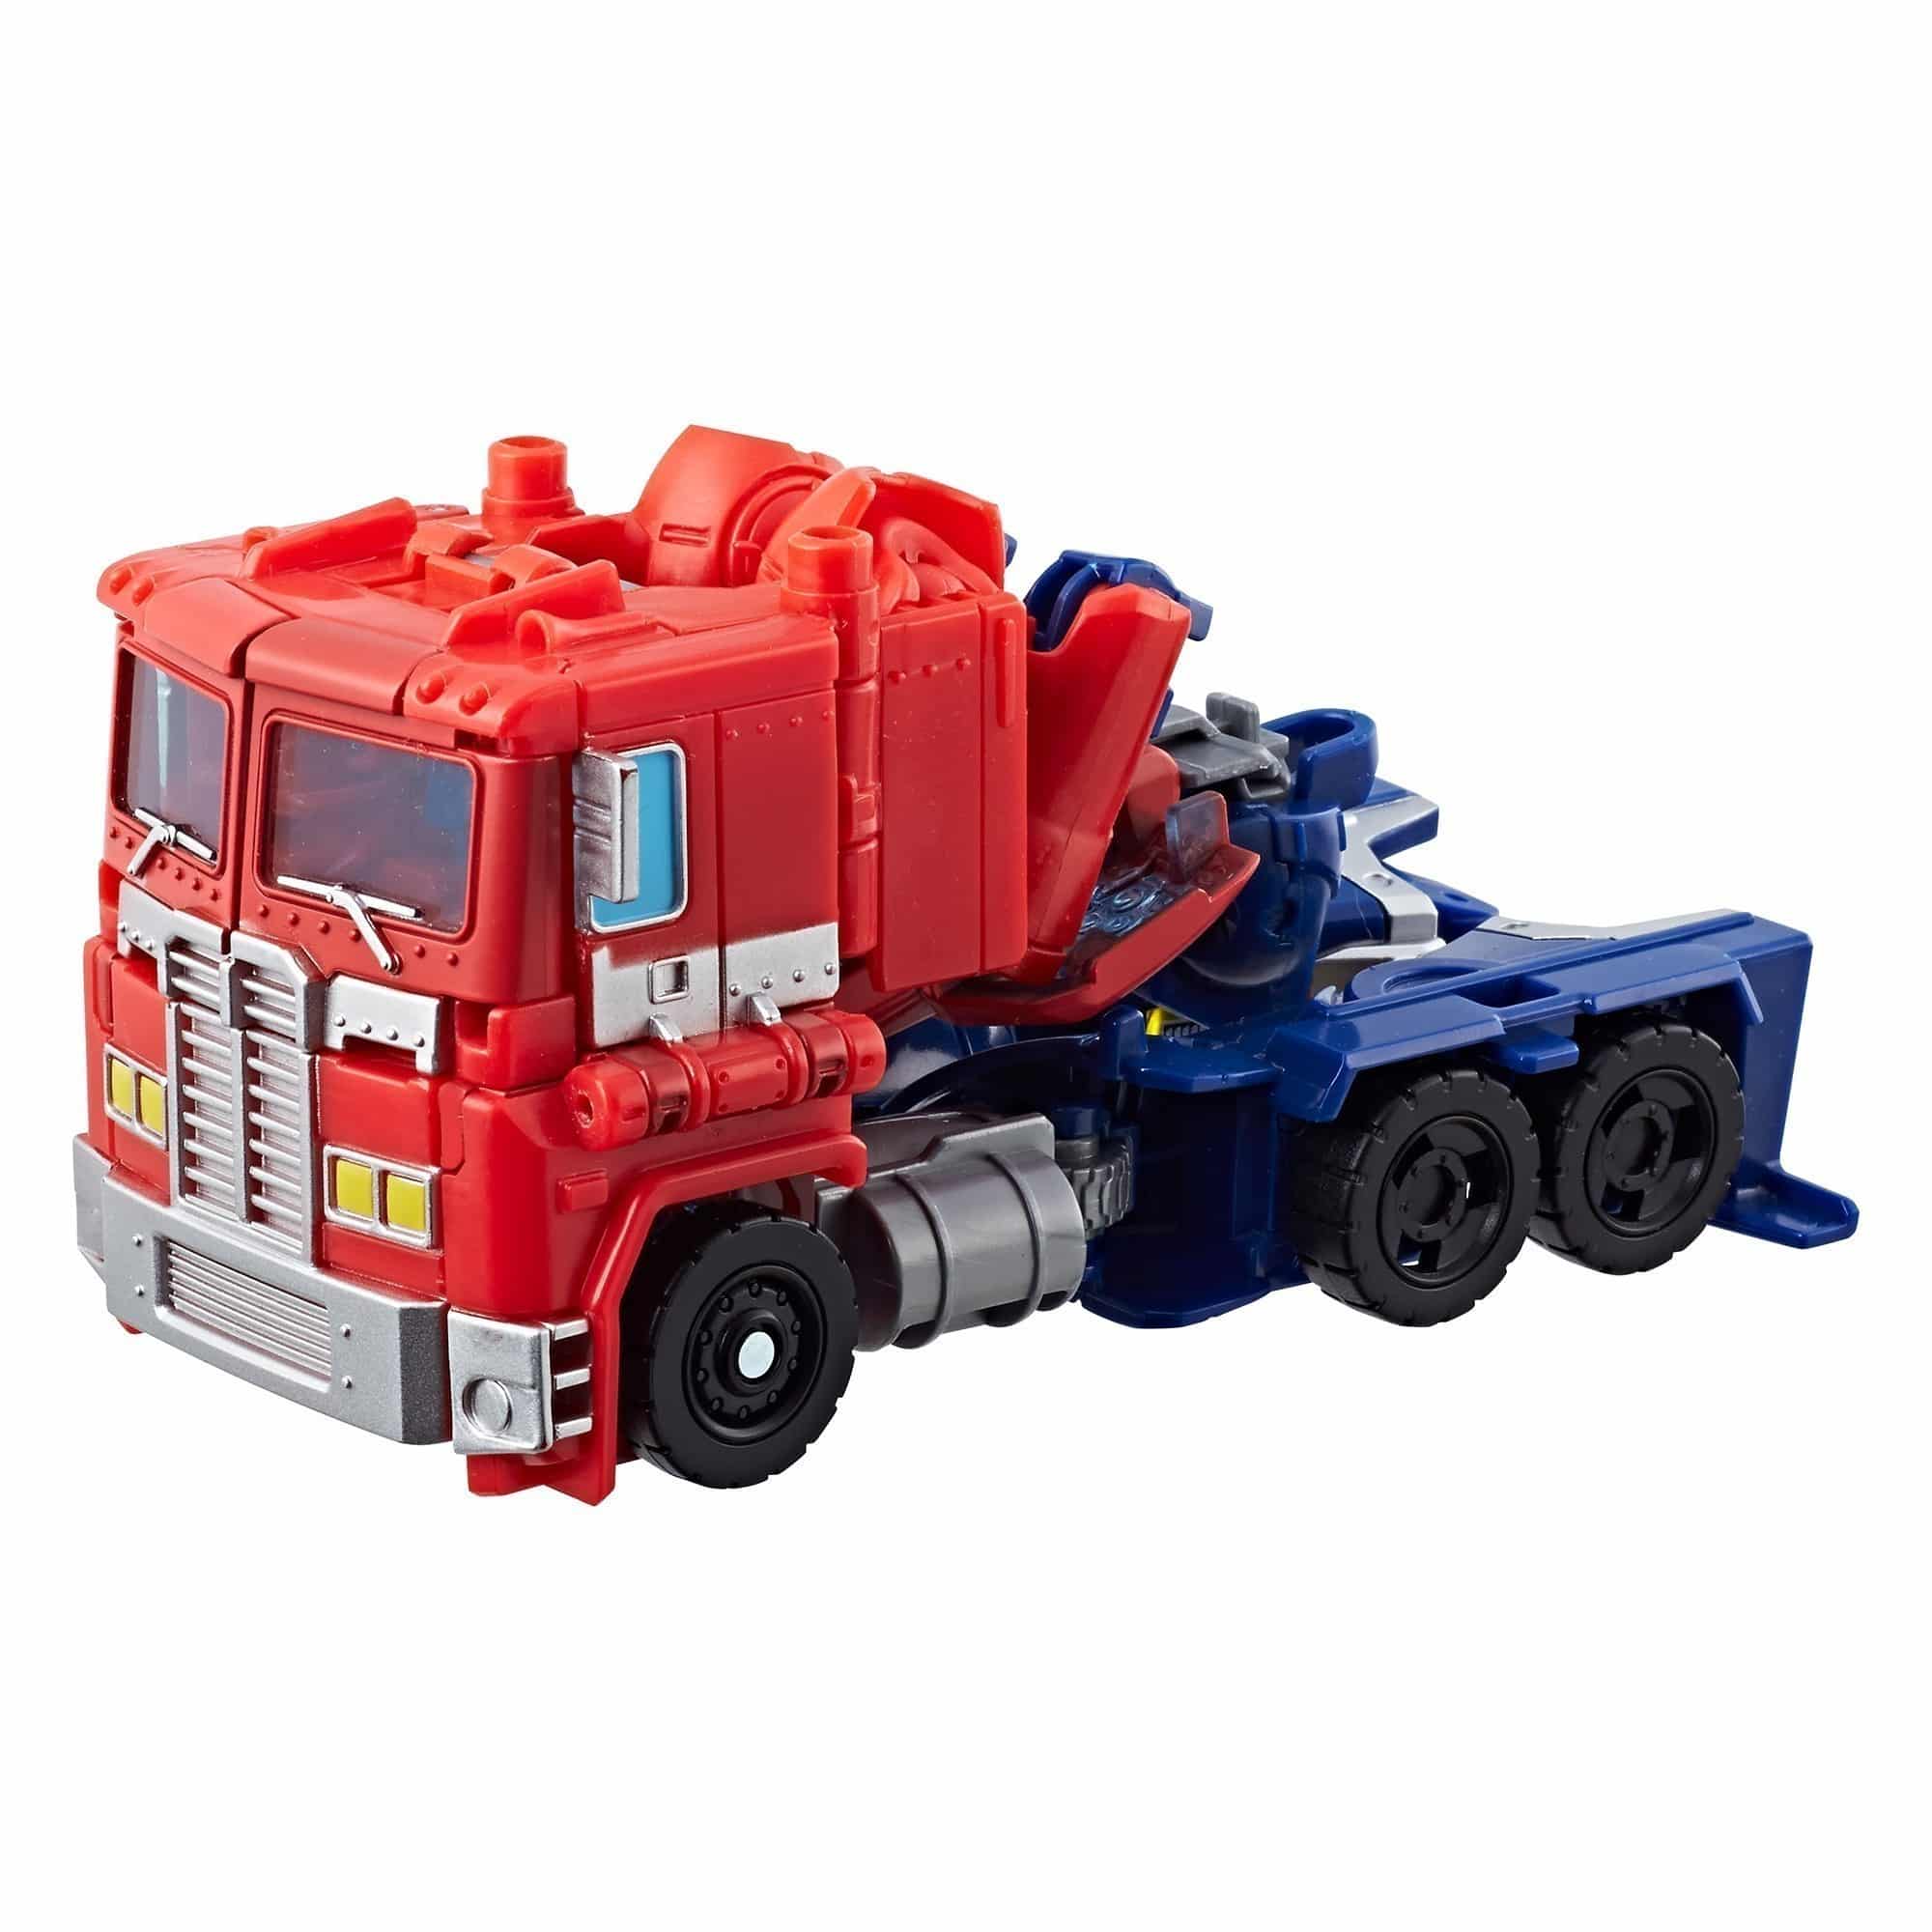 Transformers Generations - Power of the Primes - Optimus Prime